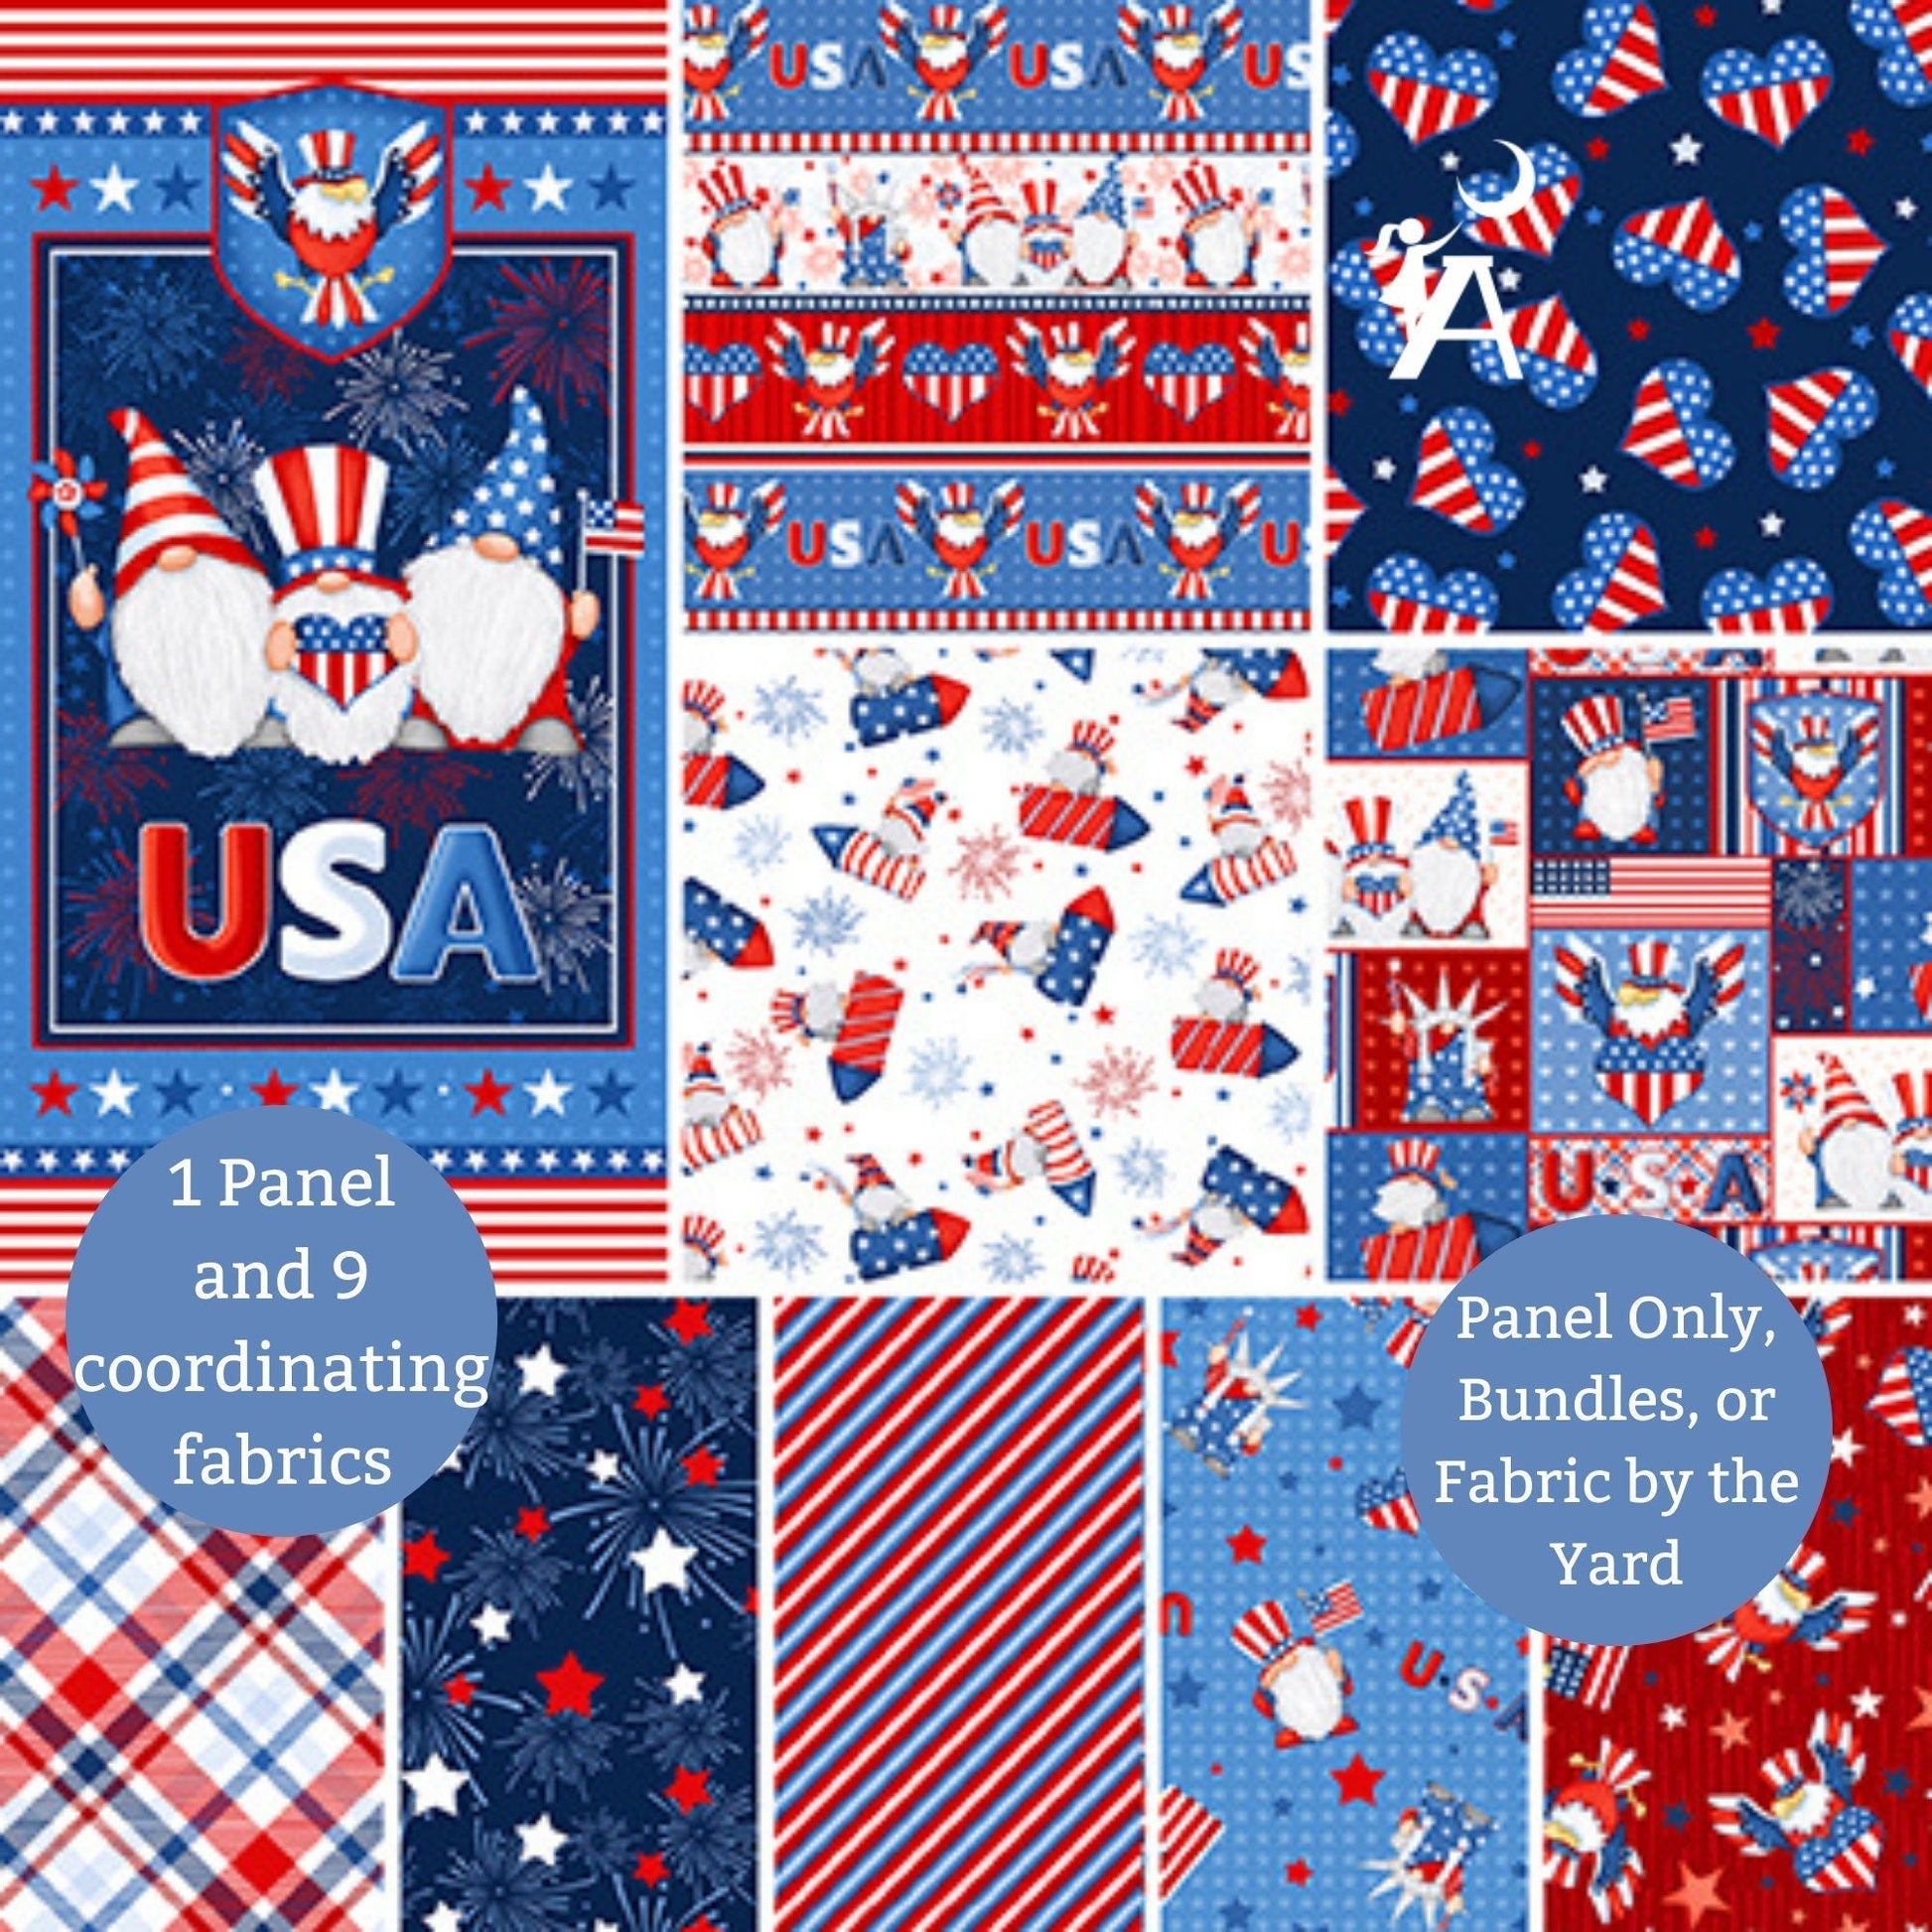 Henry Glass Fabric Gnome of the Brave Patchwork Patriotic Cotton Fabric Gnome Fabric By the Yard